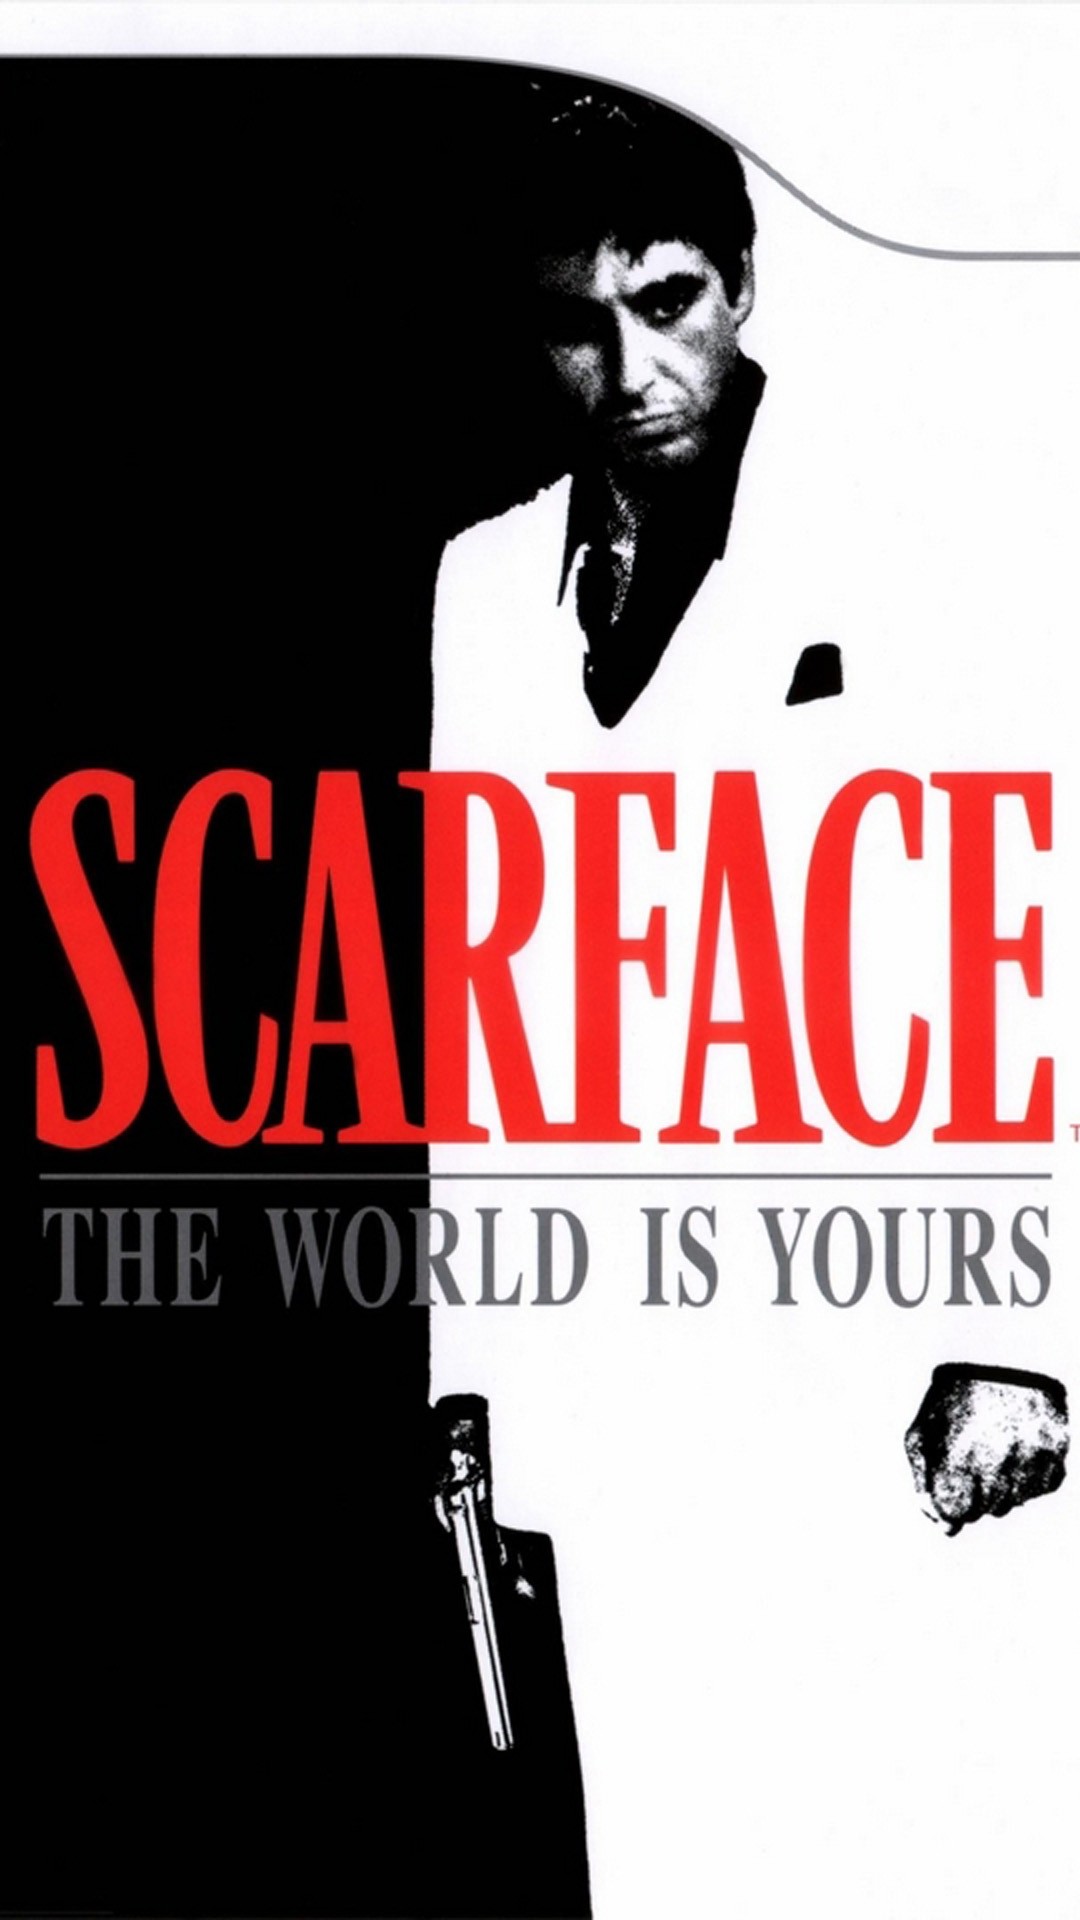 Photo Gallery - - Scarface Wallpaper Iphone 5 - HD Wallpaper 